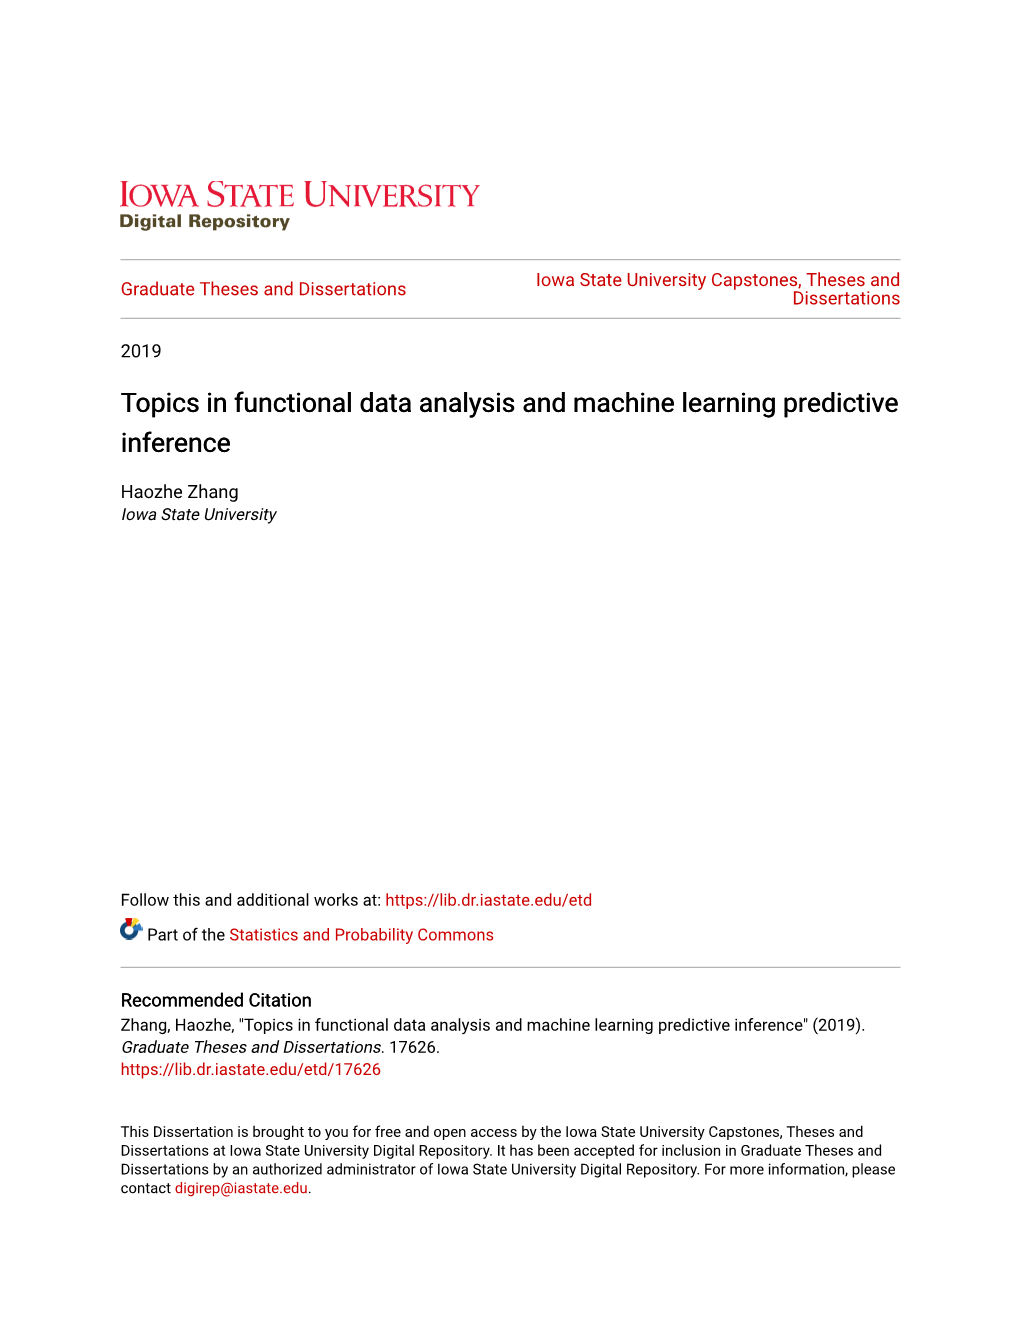 Topics in Functional Data Analysis and Machine Learning Predictive Inference